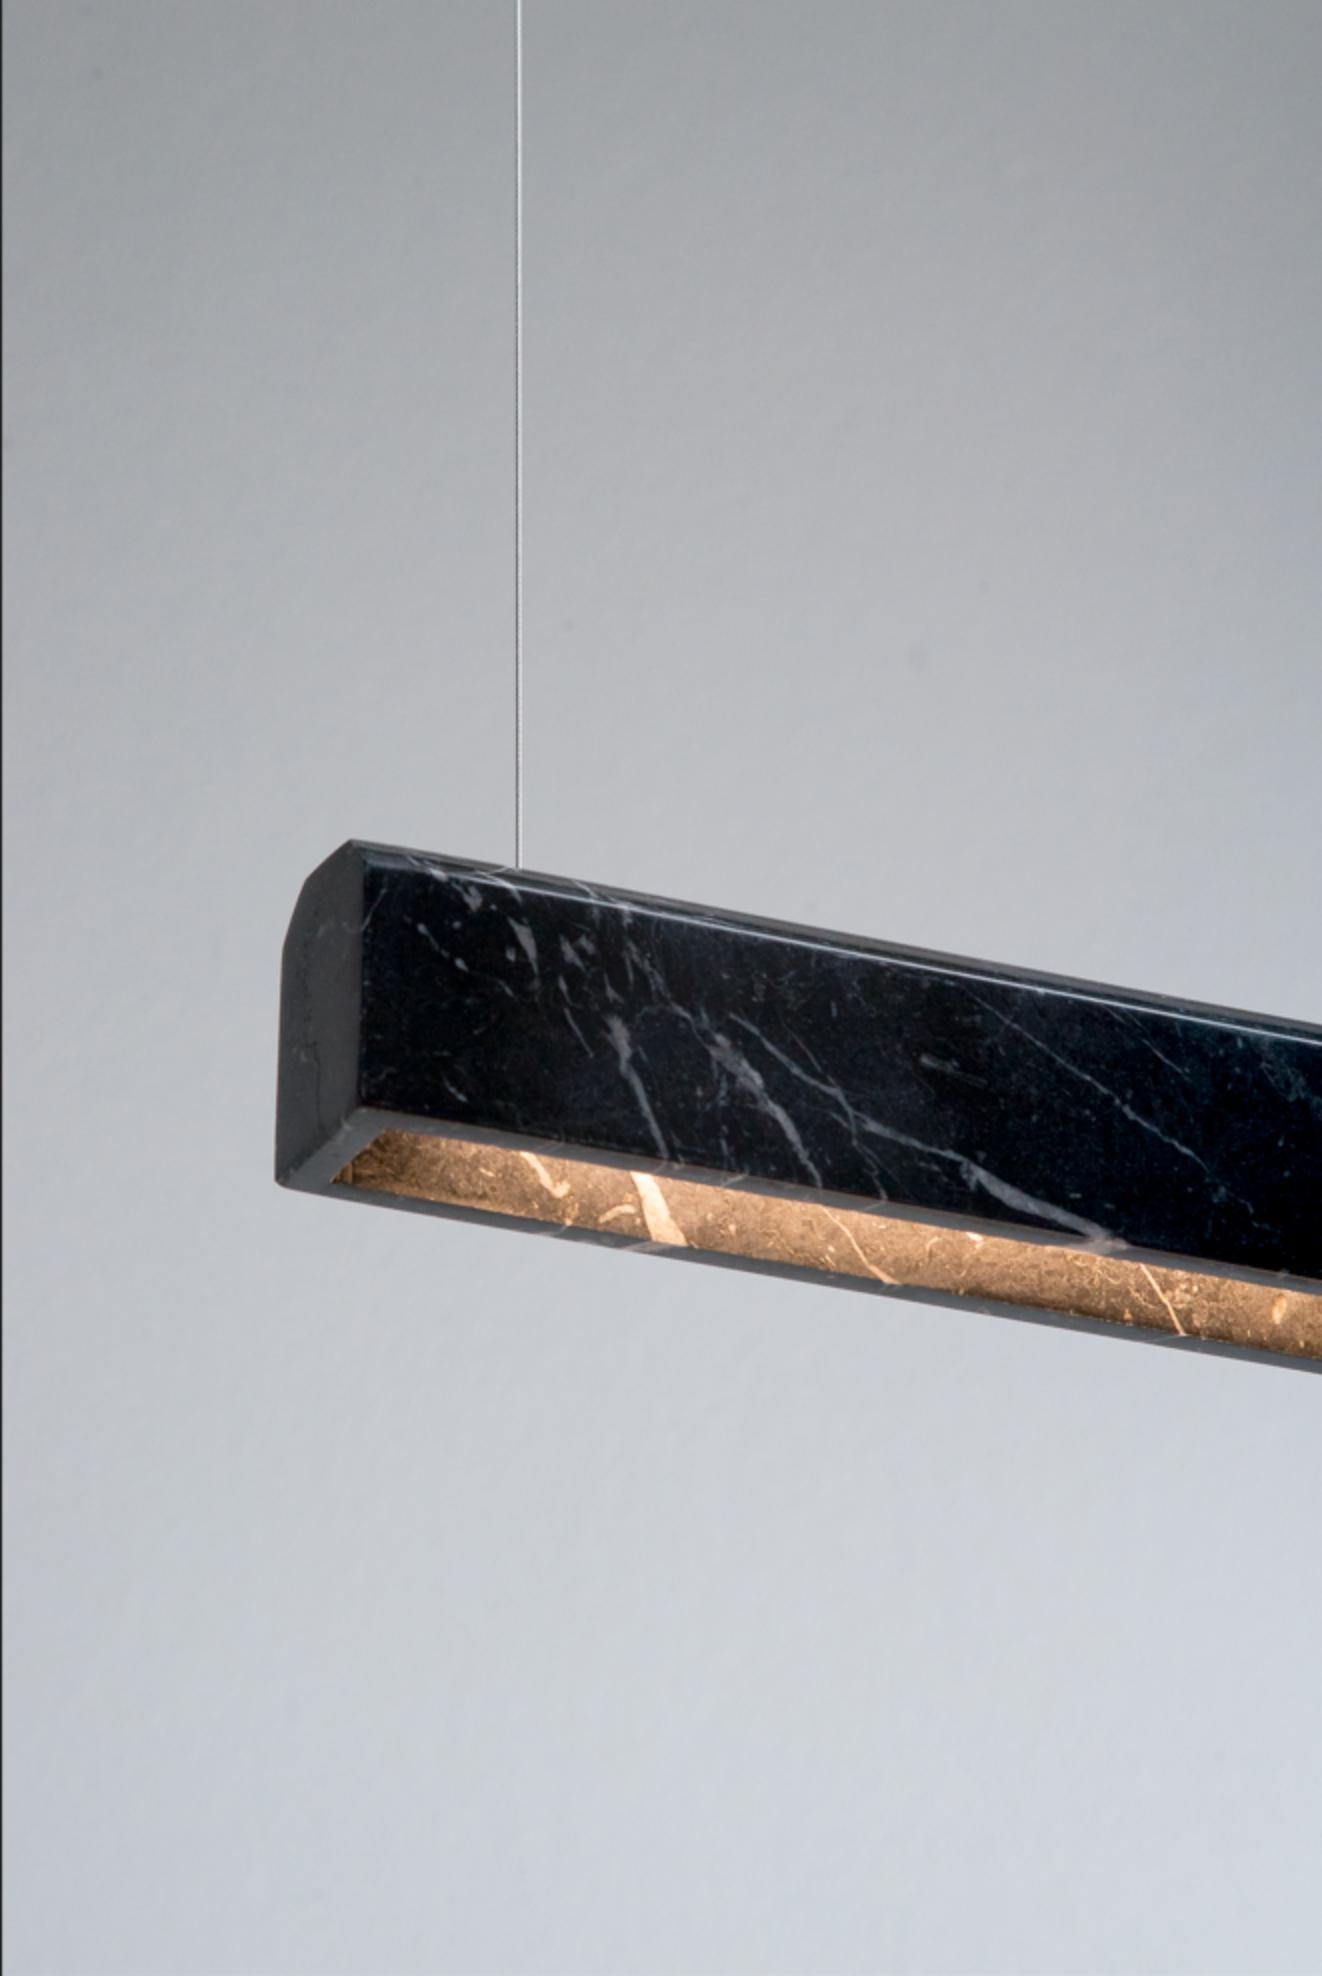 Nero Marquina Poem suspended Light by Lexavala
Dimensions: W 150 x D 4 (aprox) x H 4.5 cm 
Materials: Marble
Also available in different dimensions: 90 cm and 120 cm.

A pure, majestic and simple lamp. Choose between different materials, and